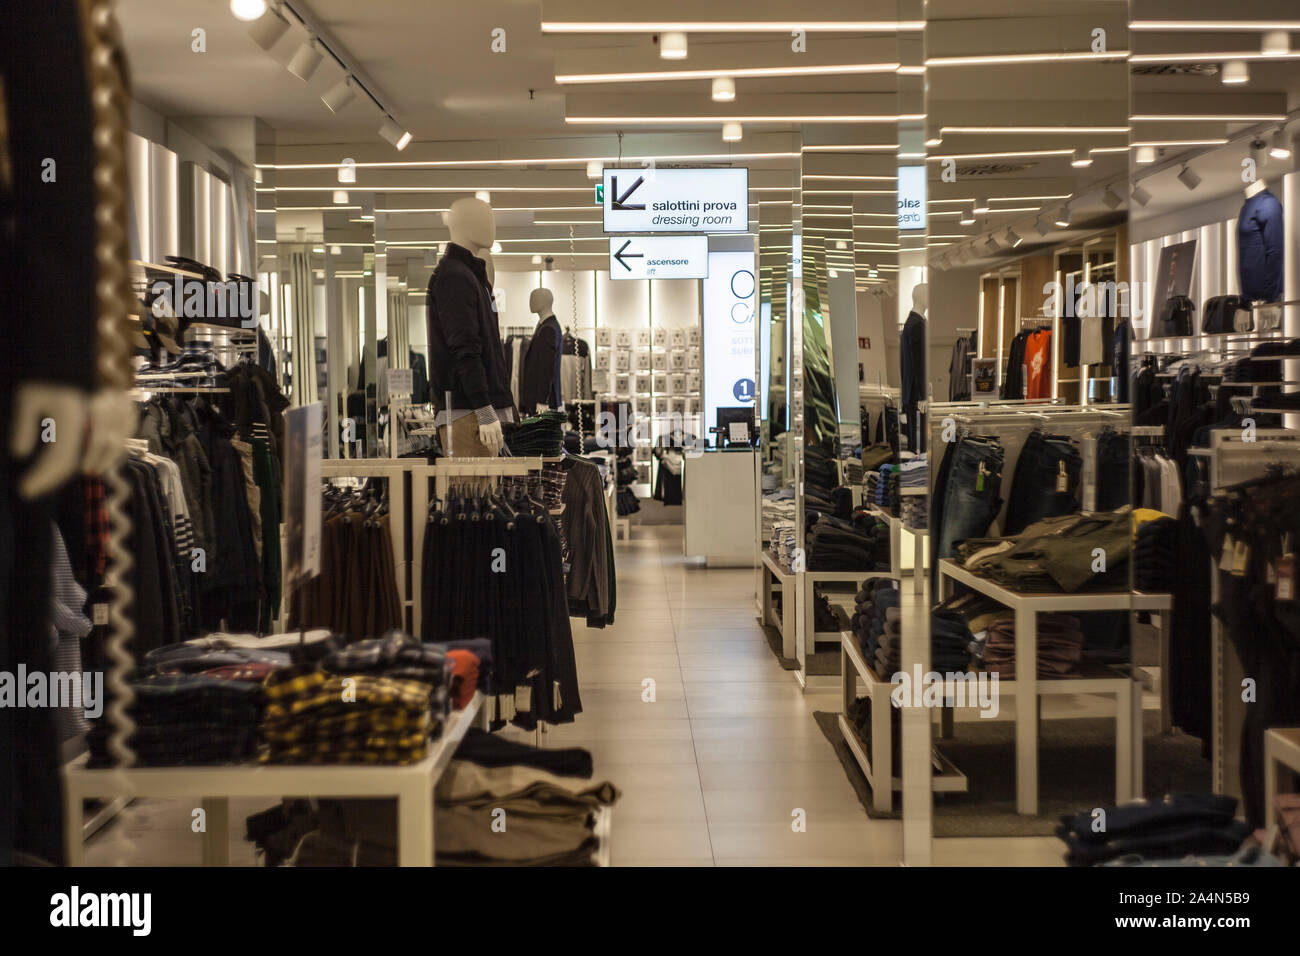 Interior of a clothing store Stock Photo